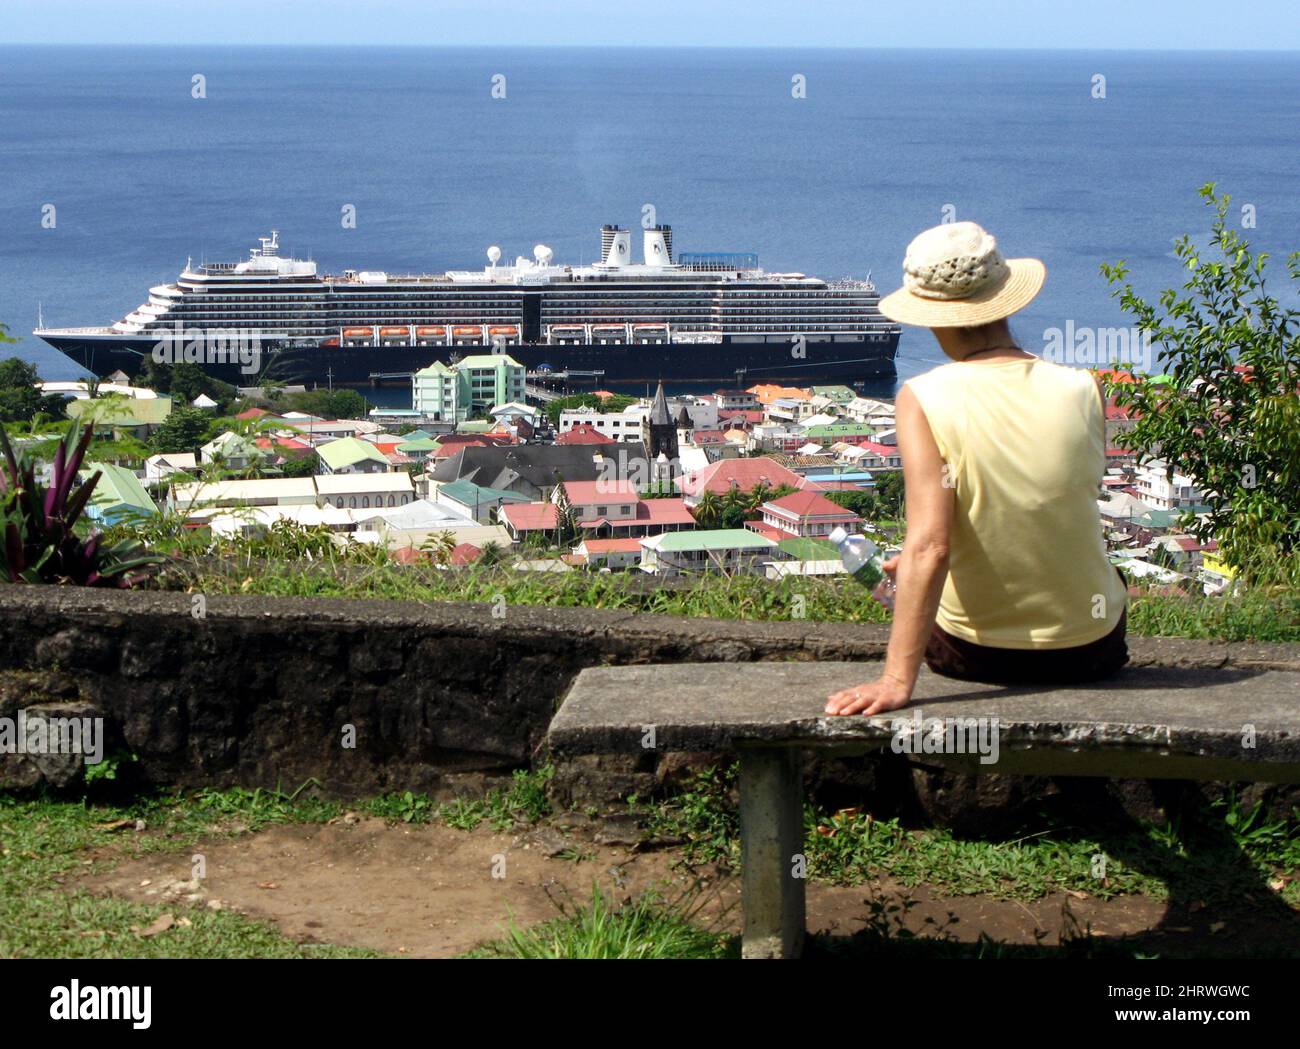 A tourist looks out over Roseau, Dominica, while the Holland America line cruise ship MS Noordam sit in the port city, Feb. 26, 2009.THE CANADIAN PRESS IMAGES/Jeff McIntosh Stock Photo